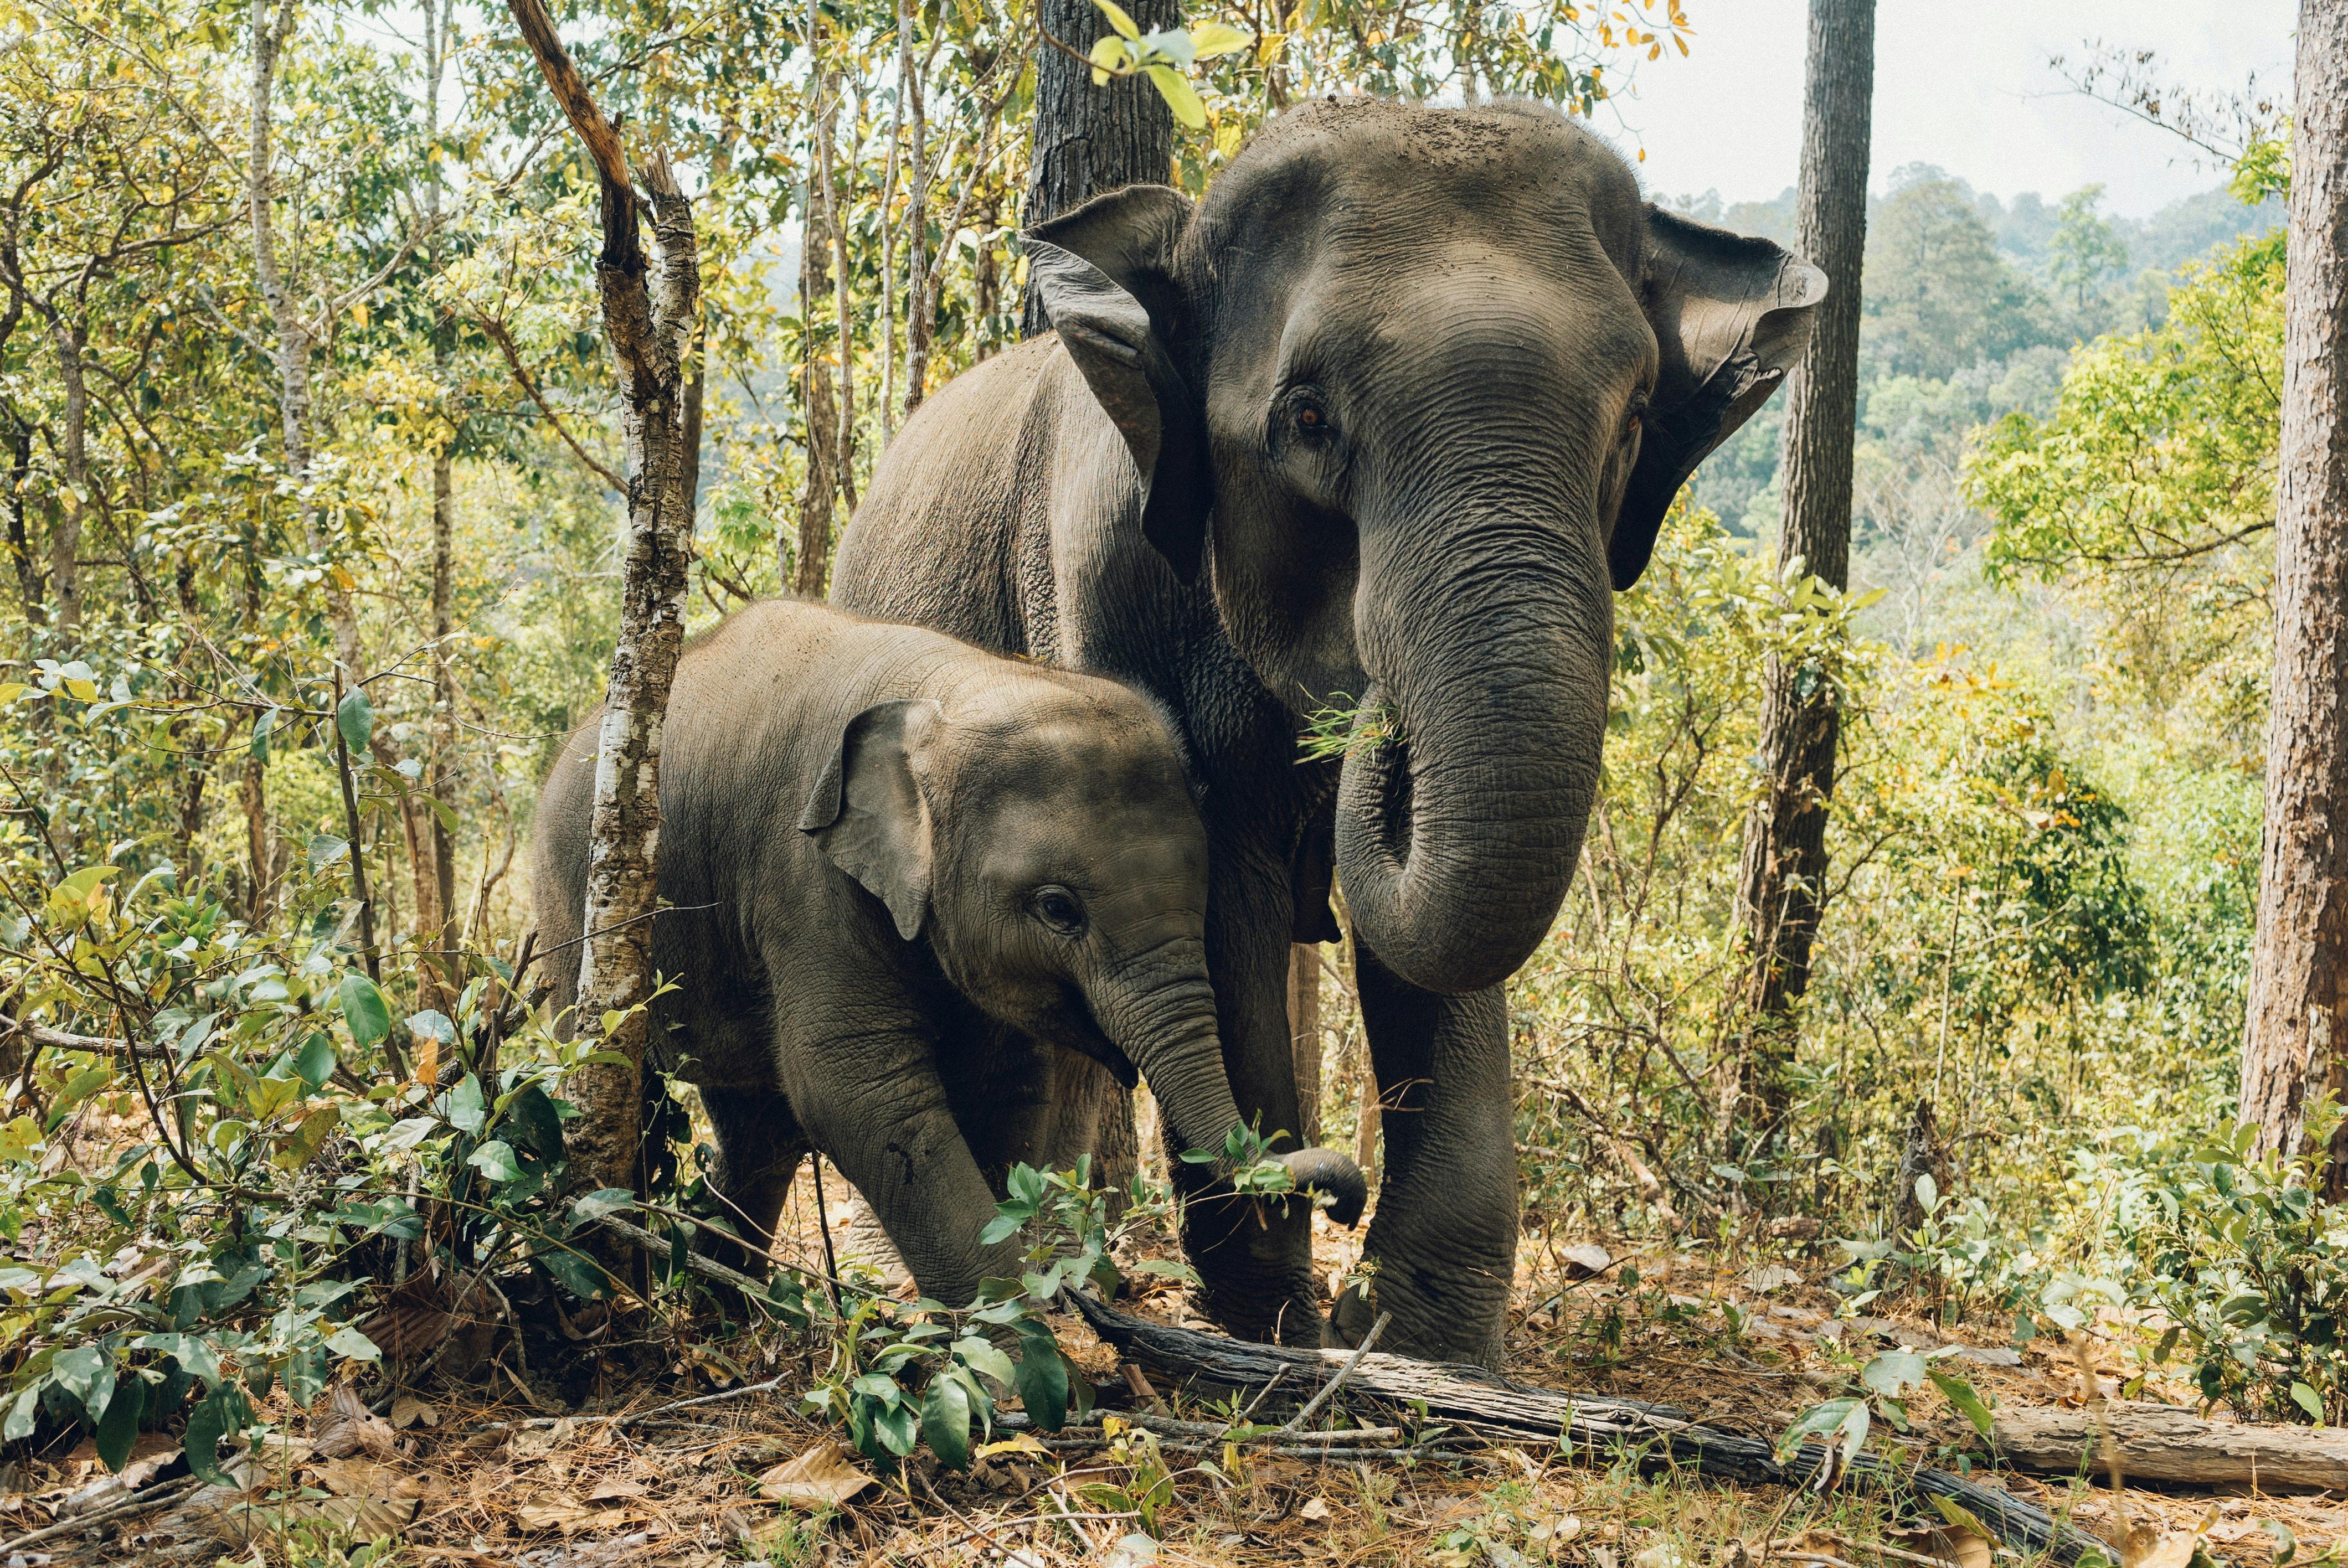 Asian elephants grazing in the forest